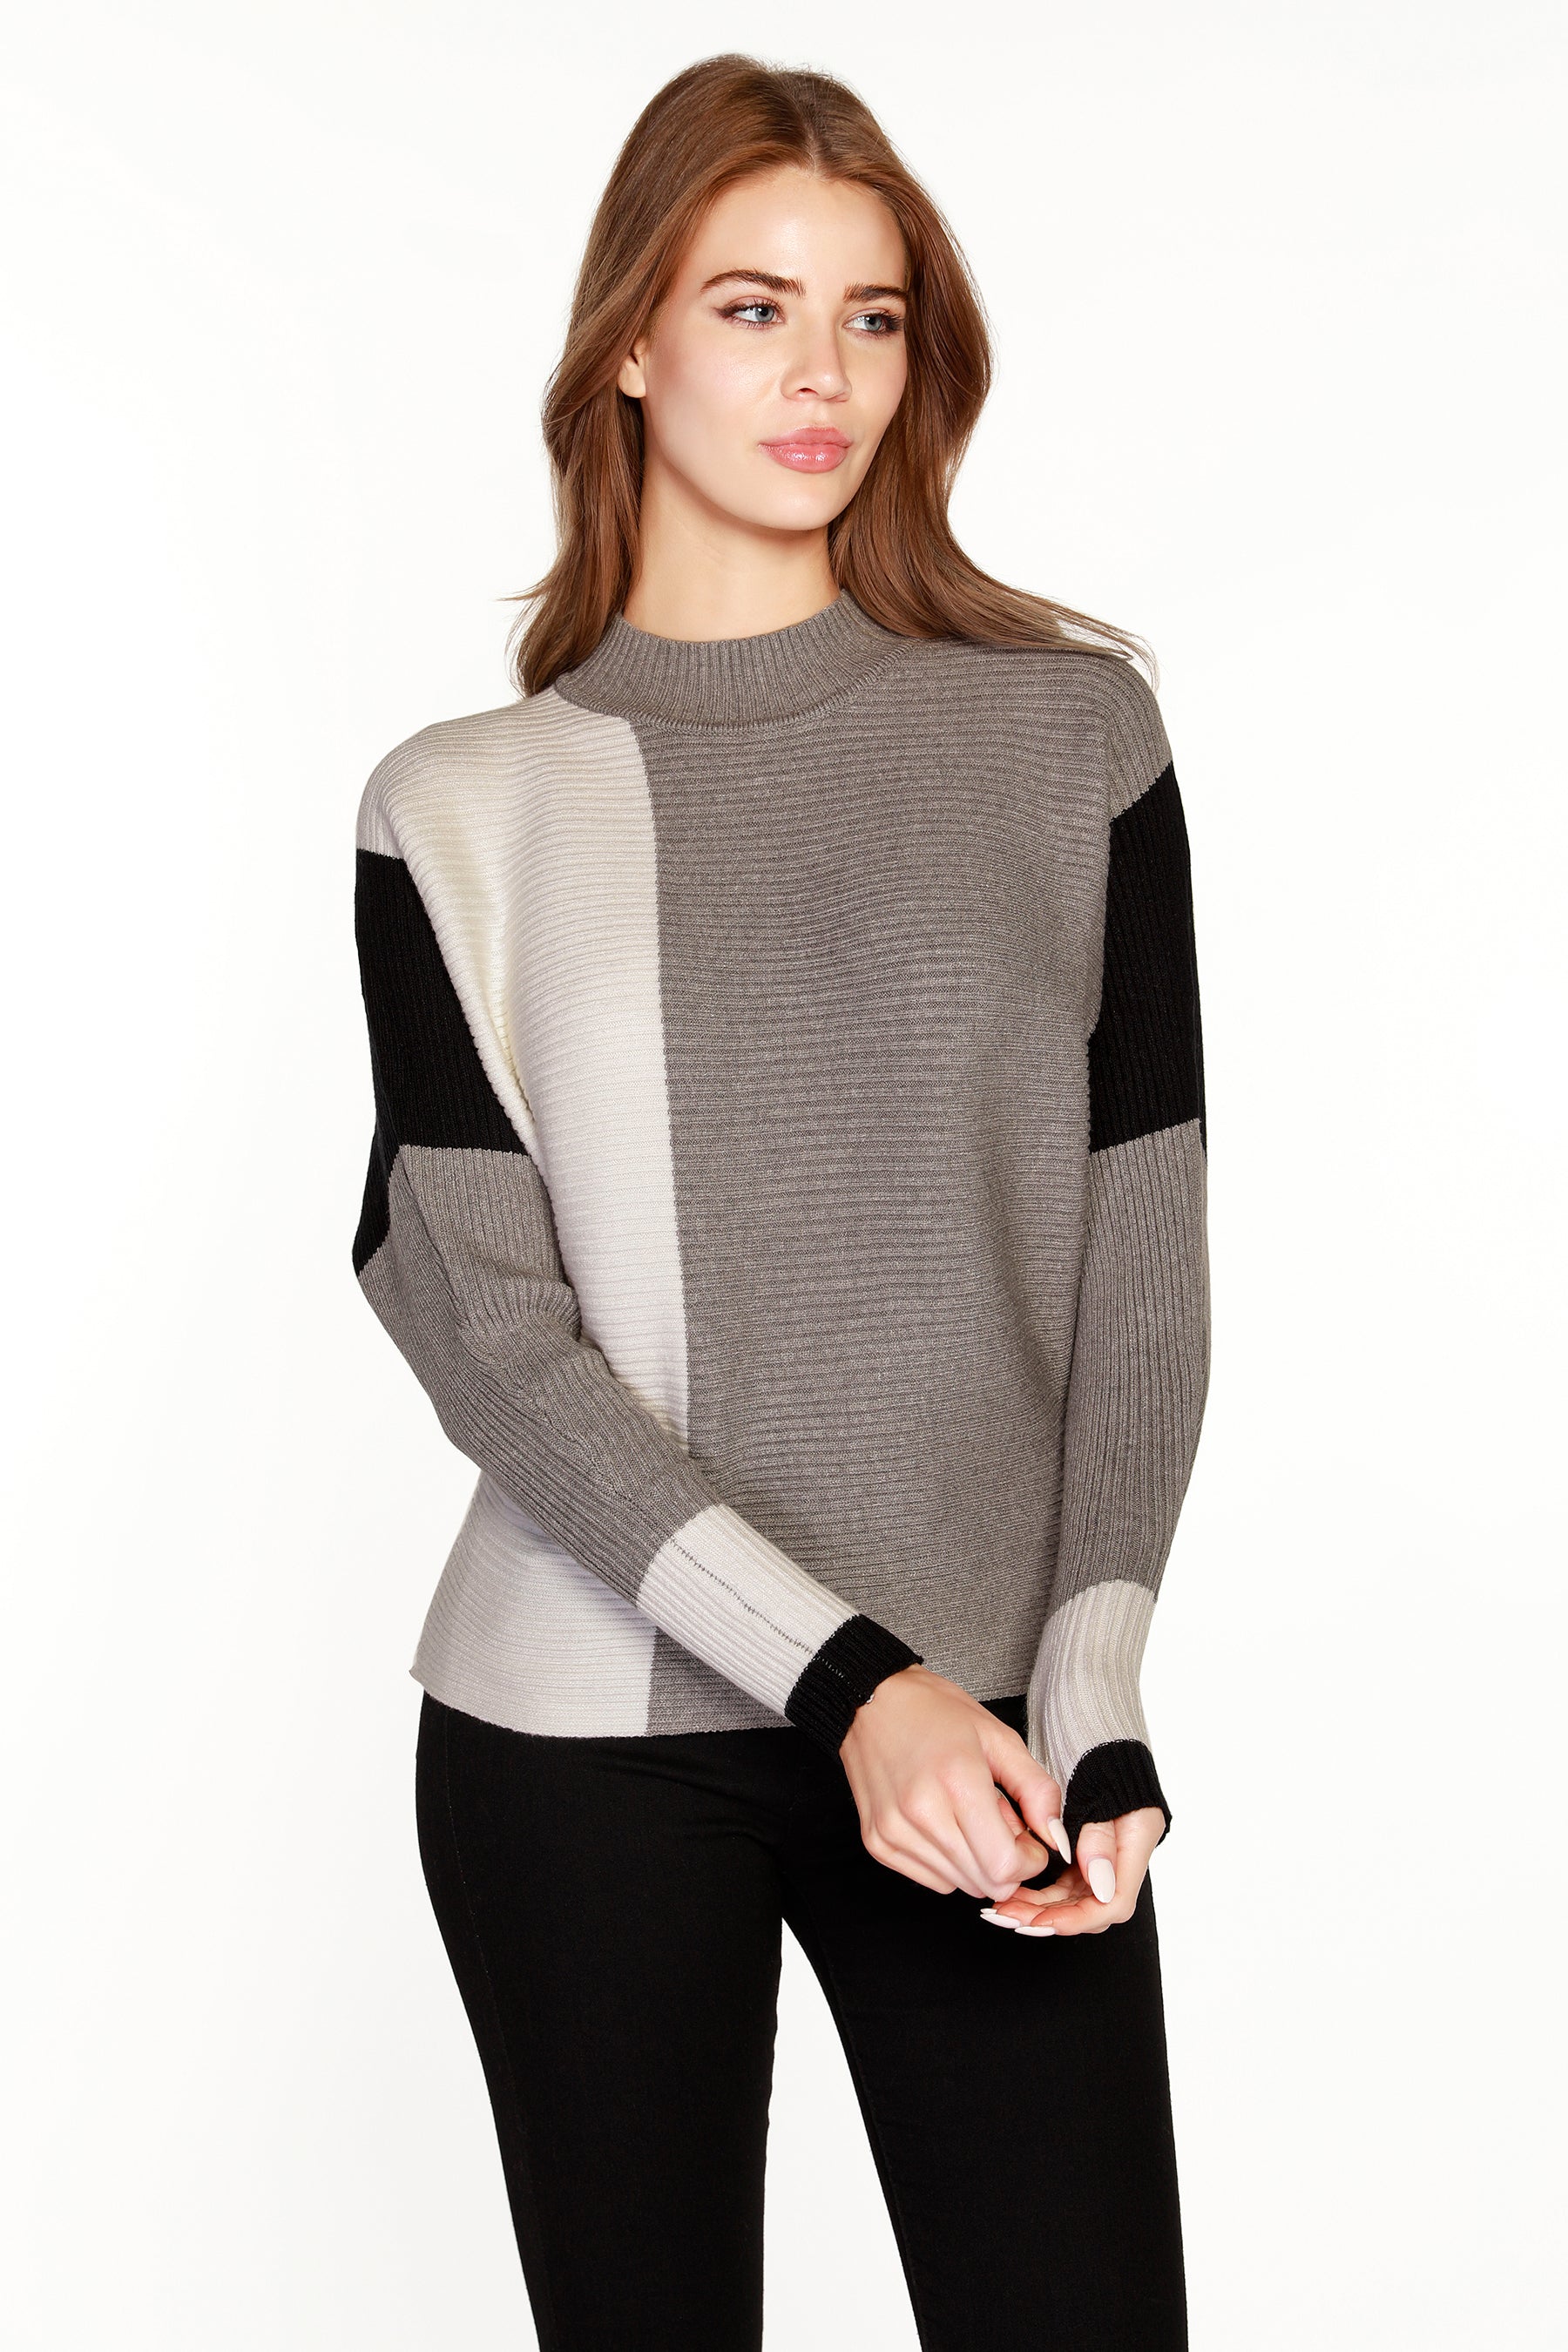 Women's Pullover Sweater in a Soft Mini Rib Color Block Knit with a Mock Neck